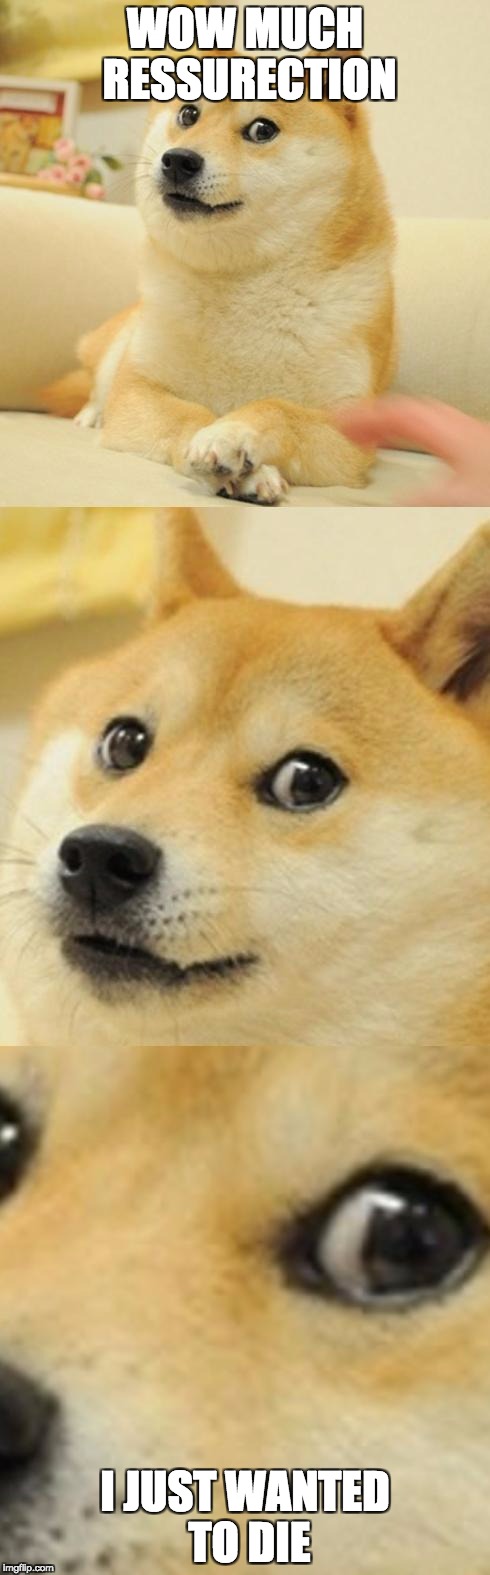 Doge Game |  WOW MUCH RESSURECTION; I JUST WANTED TO DIE | image tagged in doge game | made w/ Imgflip meme maker